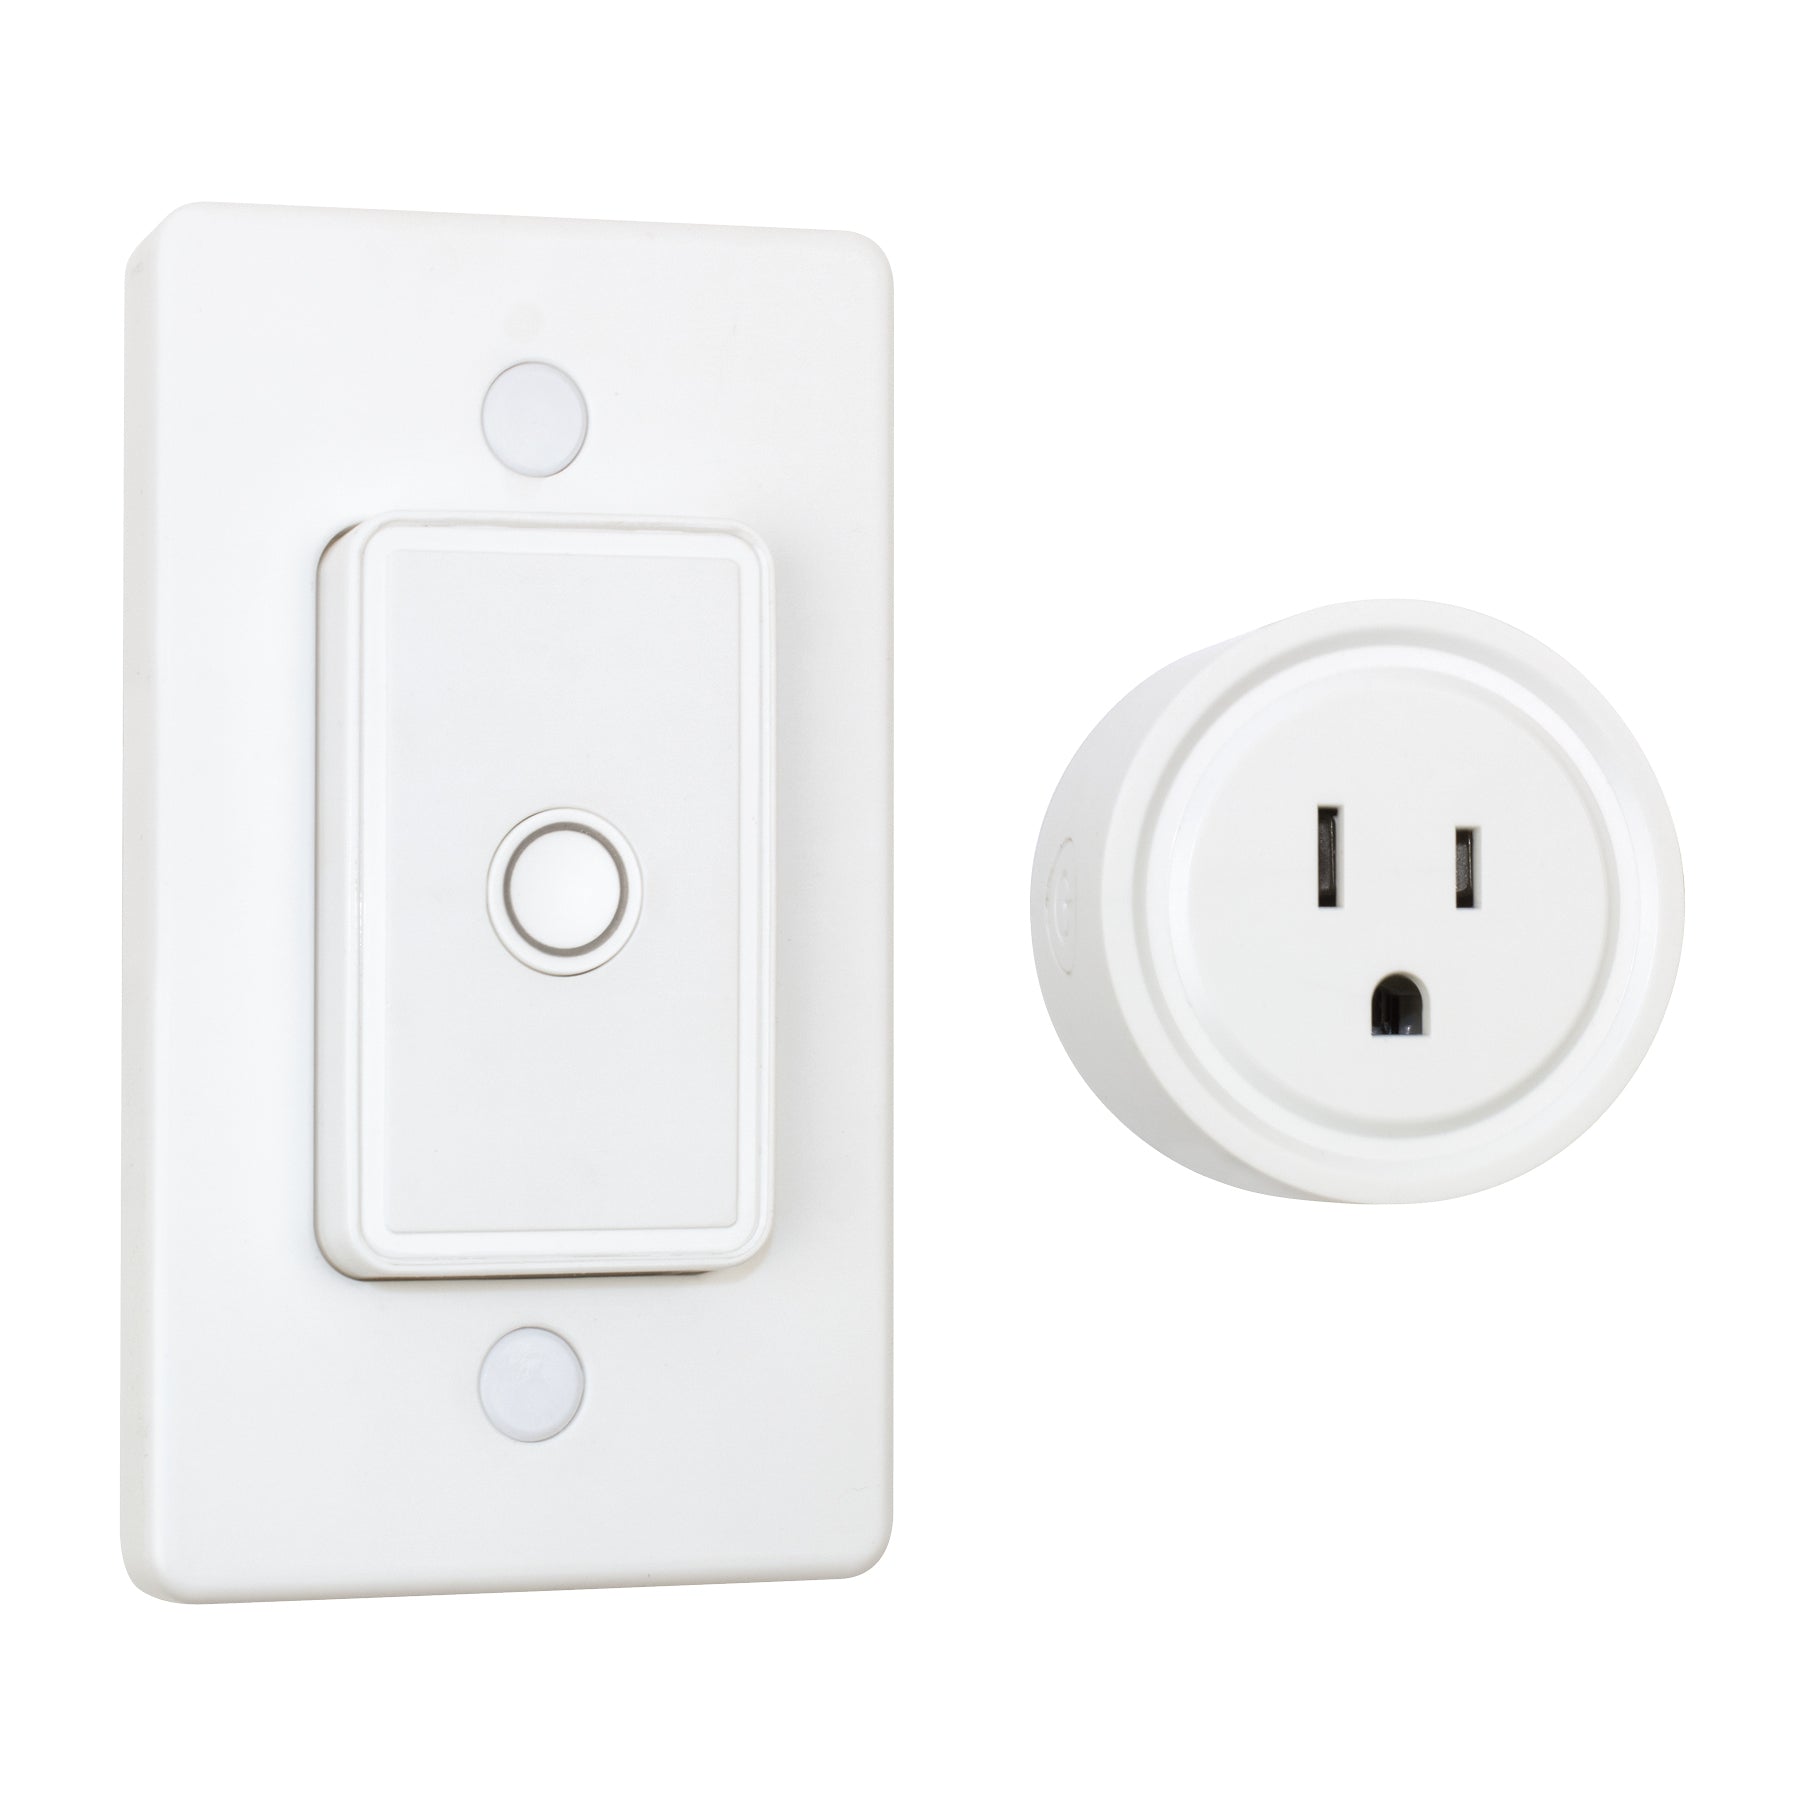 Remote Control Outlet Wireless Light Switch 100 FT Range 5 Outlets